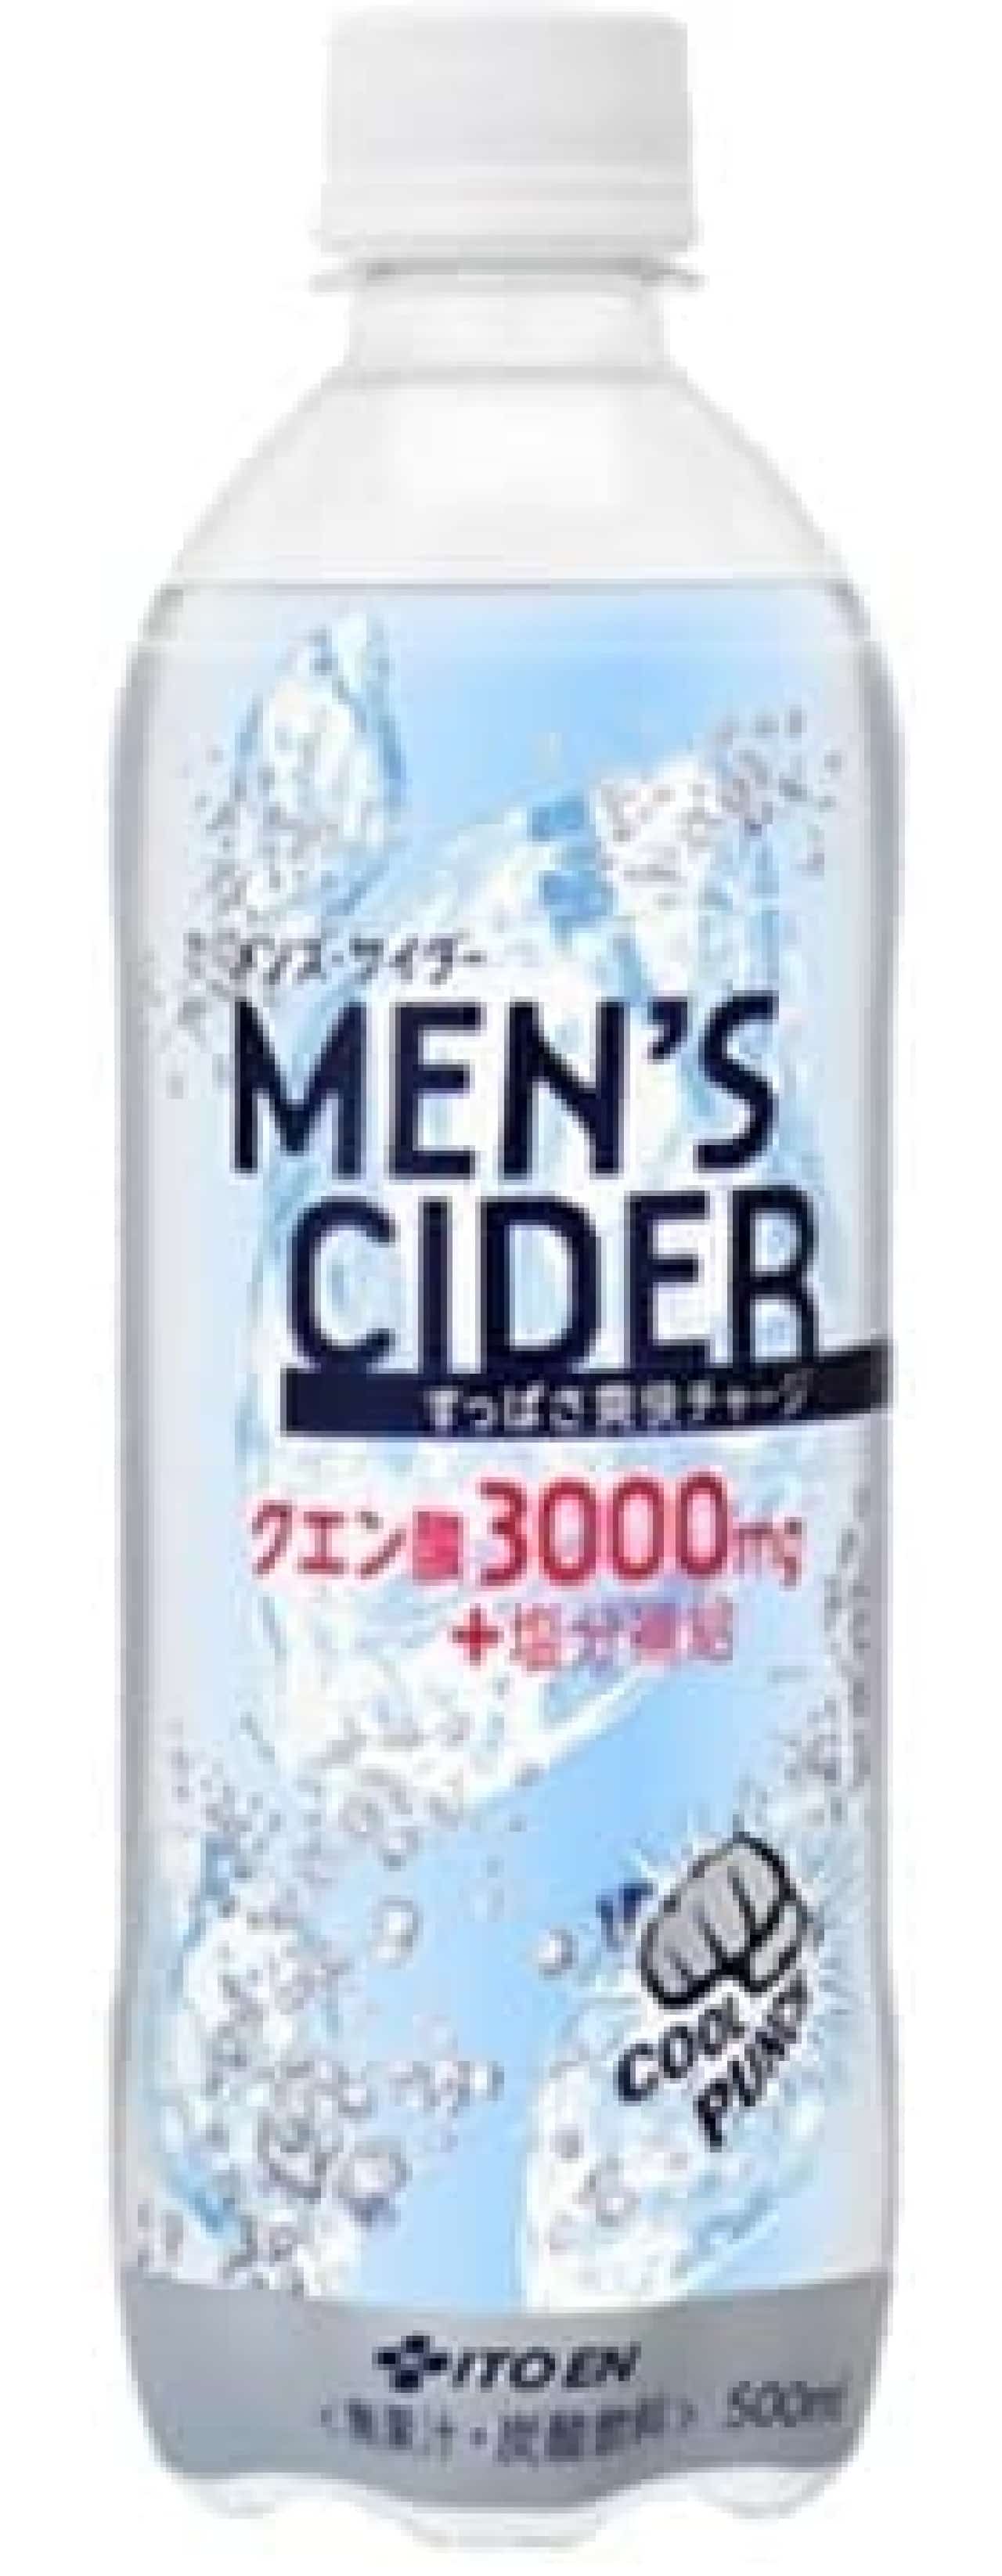 Is this a "male cider"?